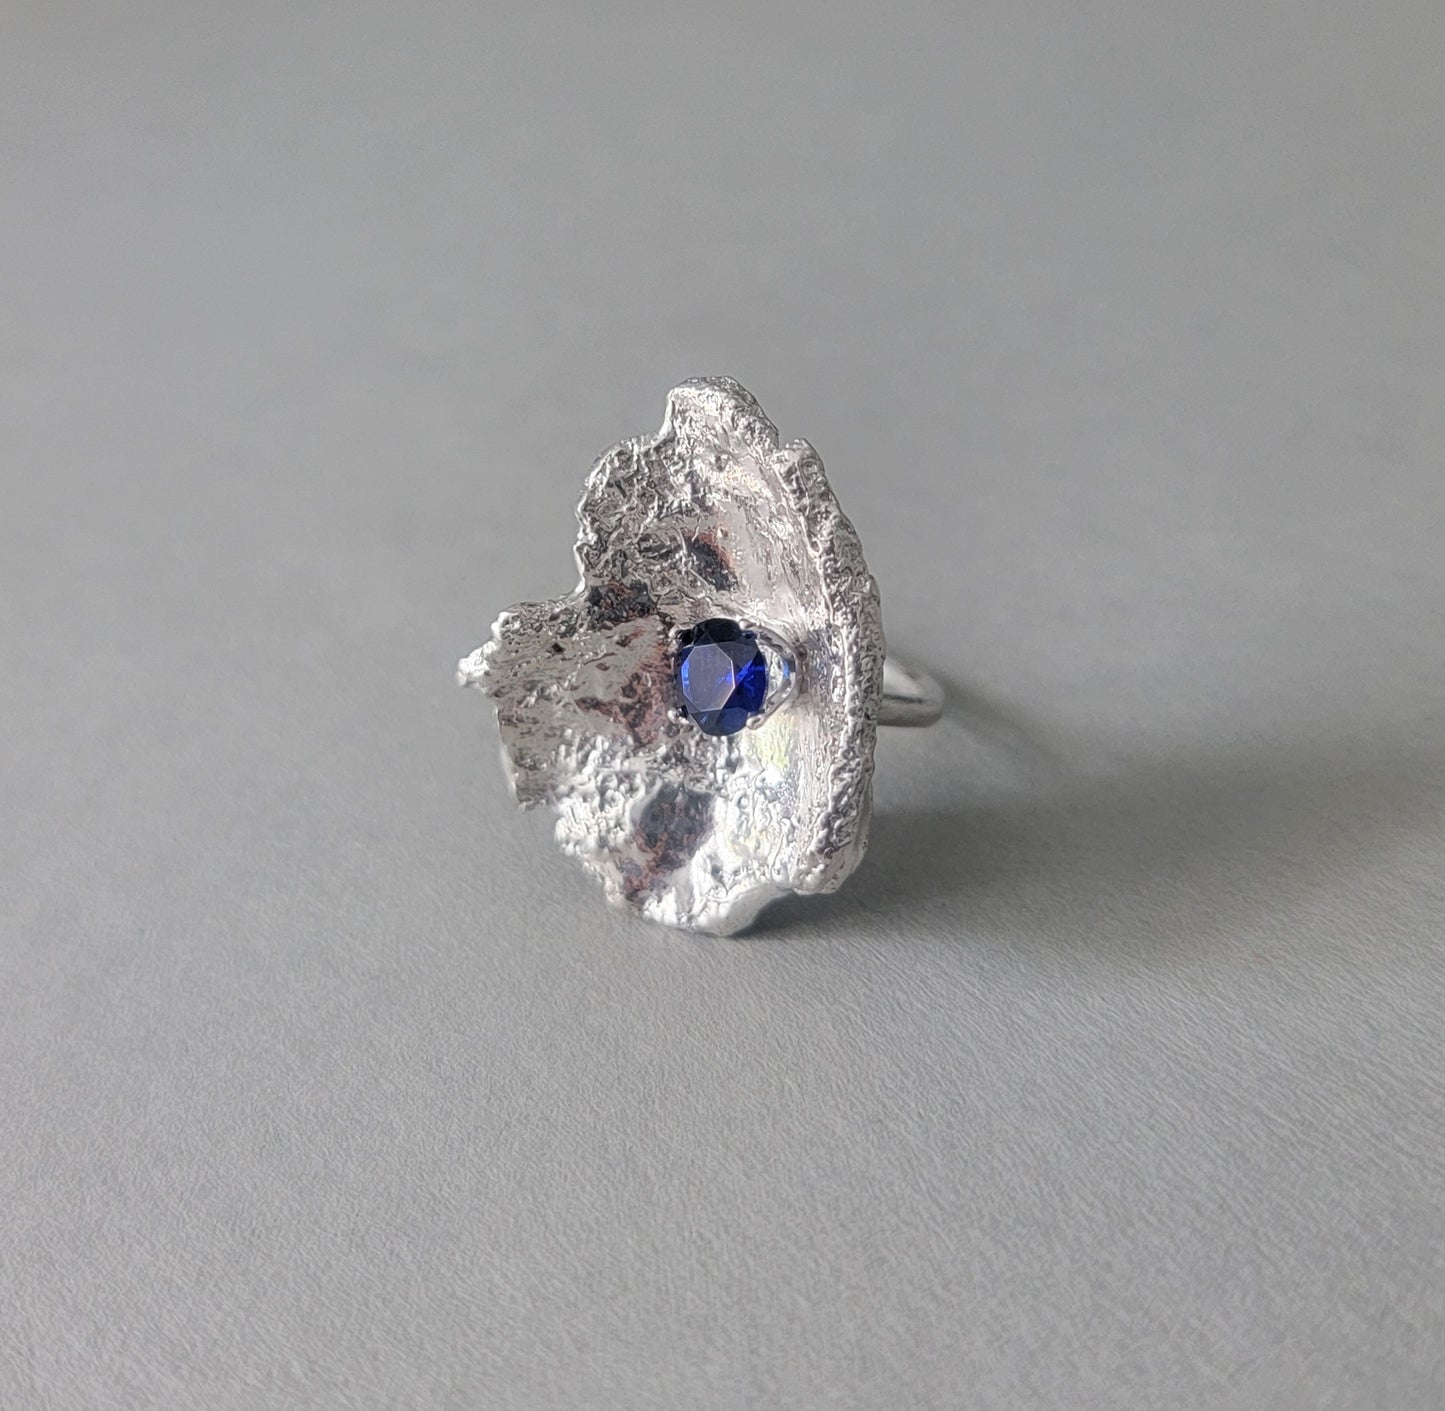 Abstract Chip Ring, Sterling Silver and Sapphire